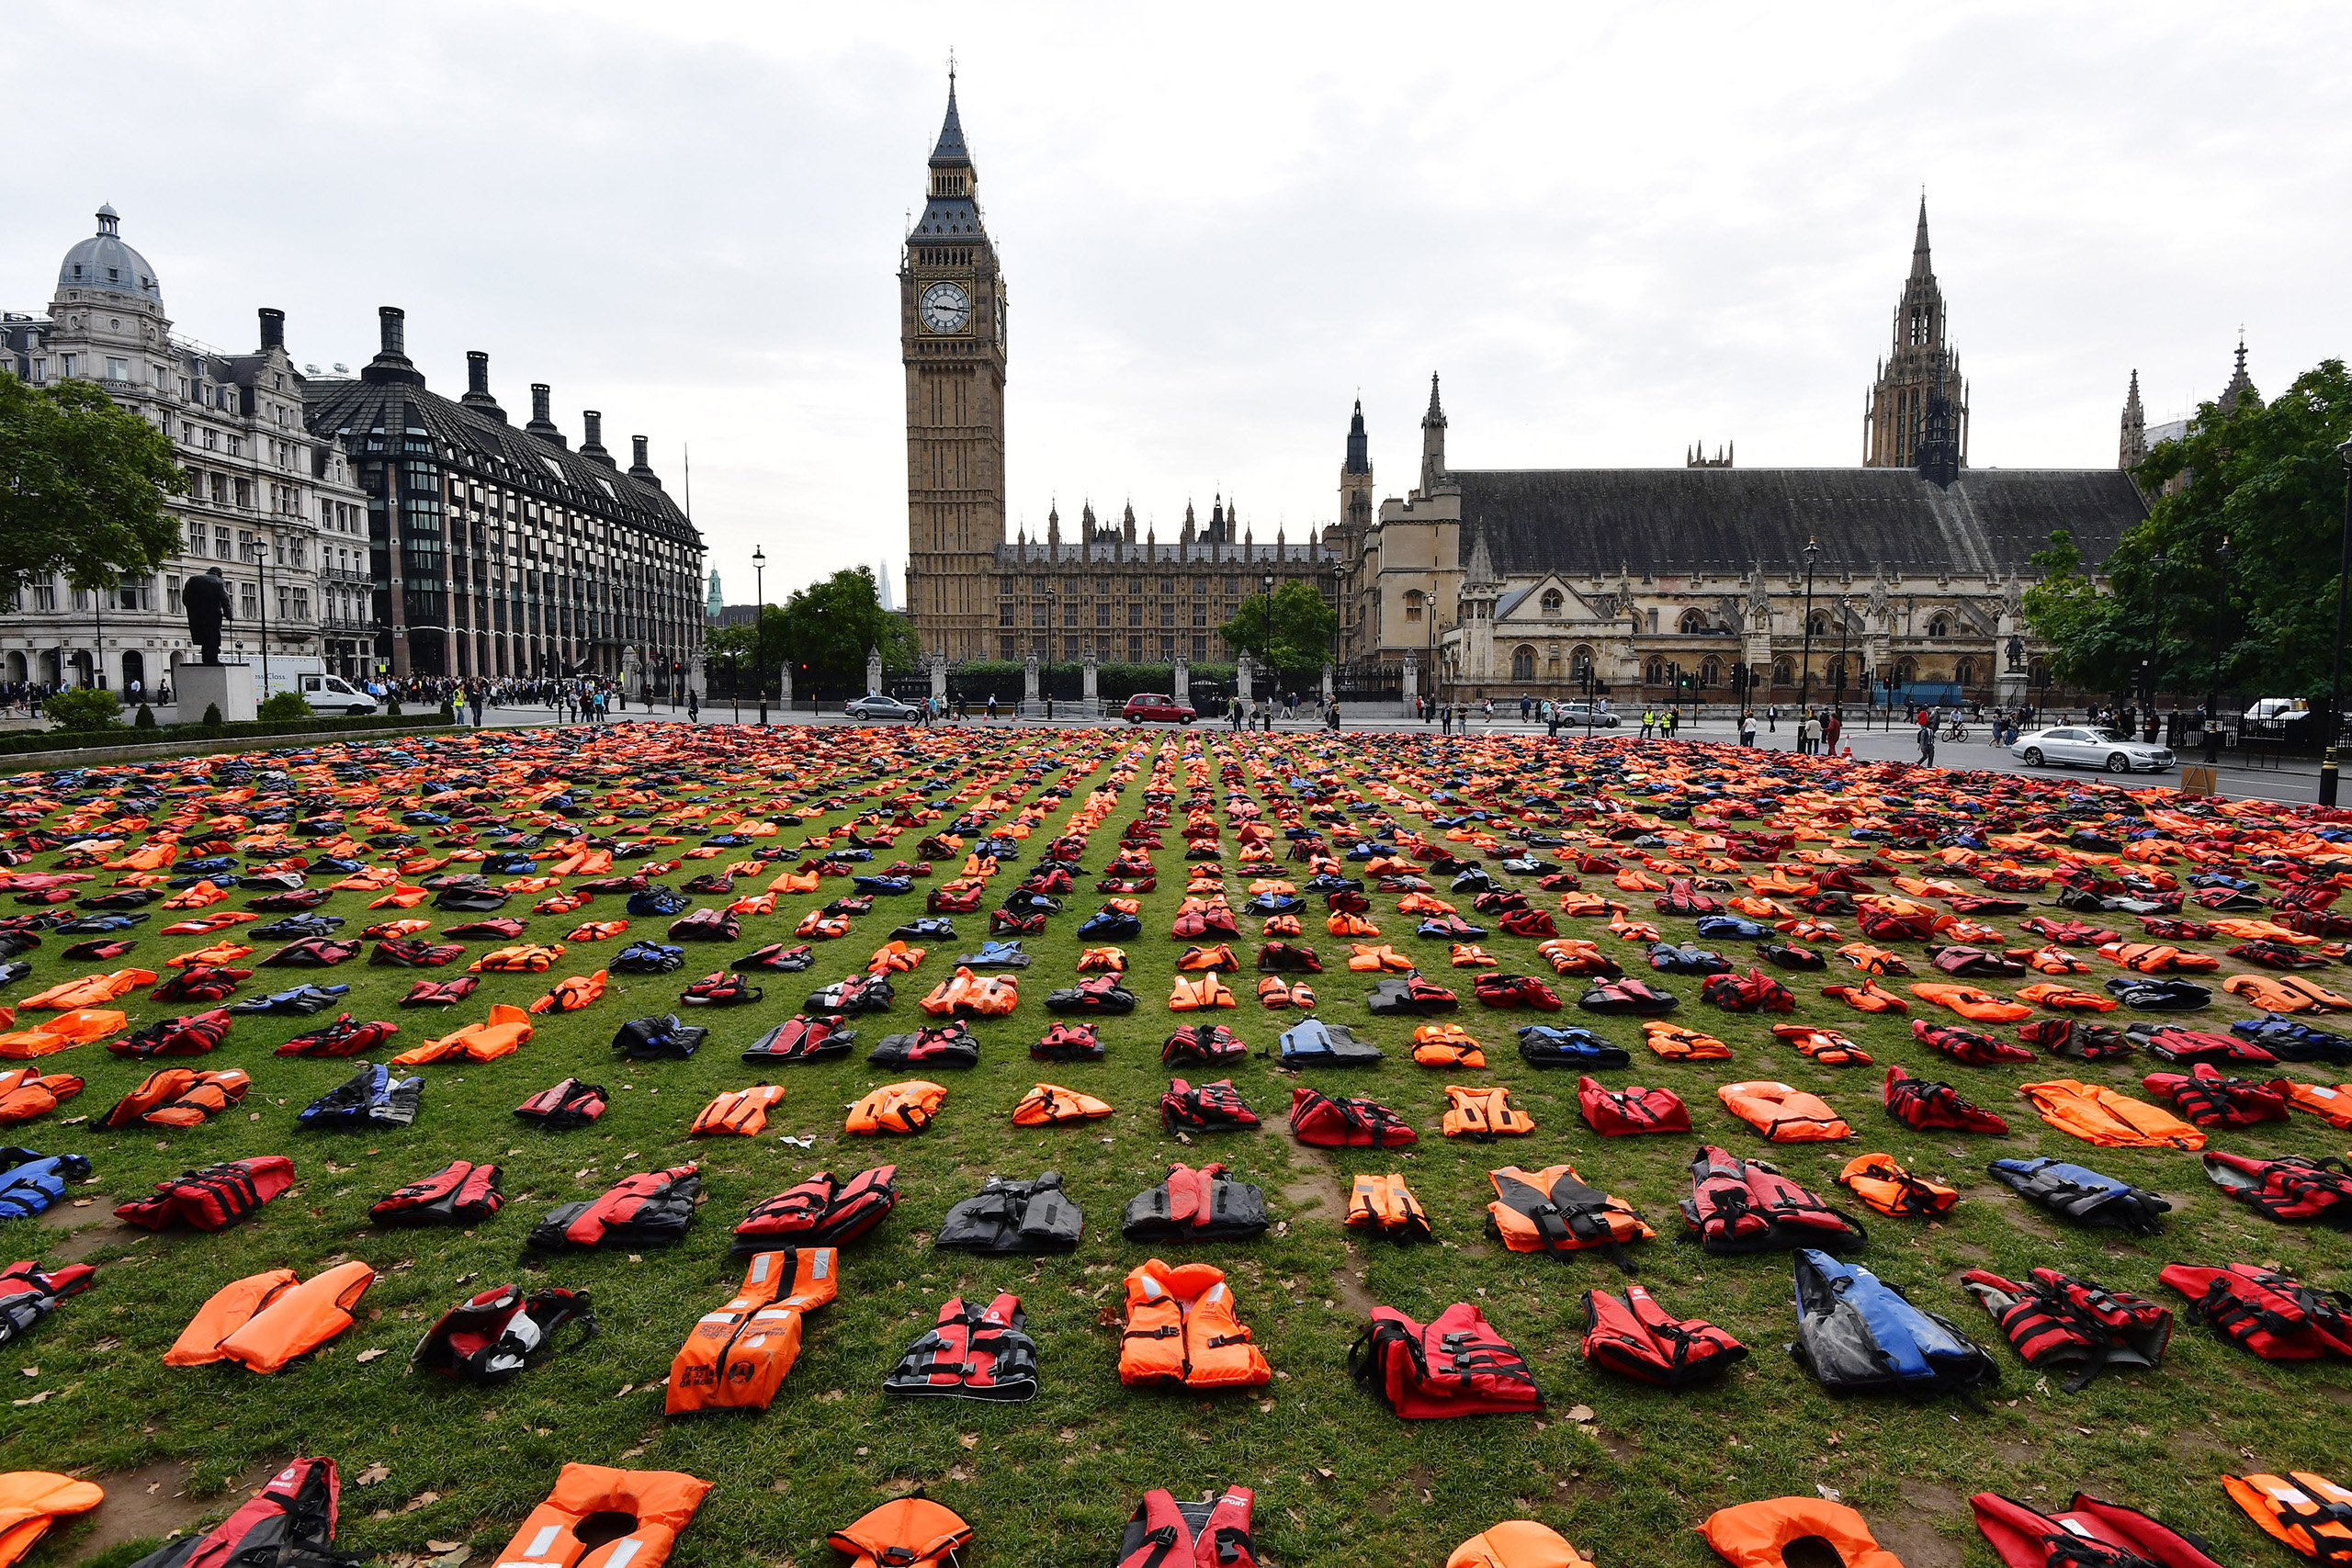 Lifejackets that have been used by refugees to cross the sea to Europe are laid out in Parliament Square in London on Sept. 19, 2016. (Carl Court—Getty Images)